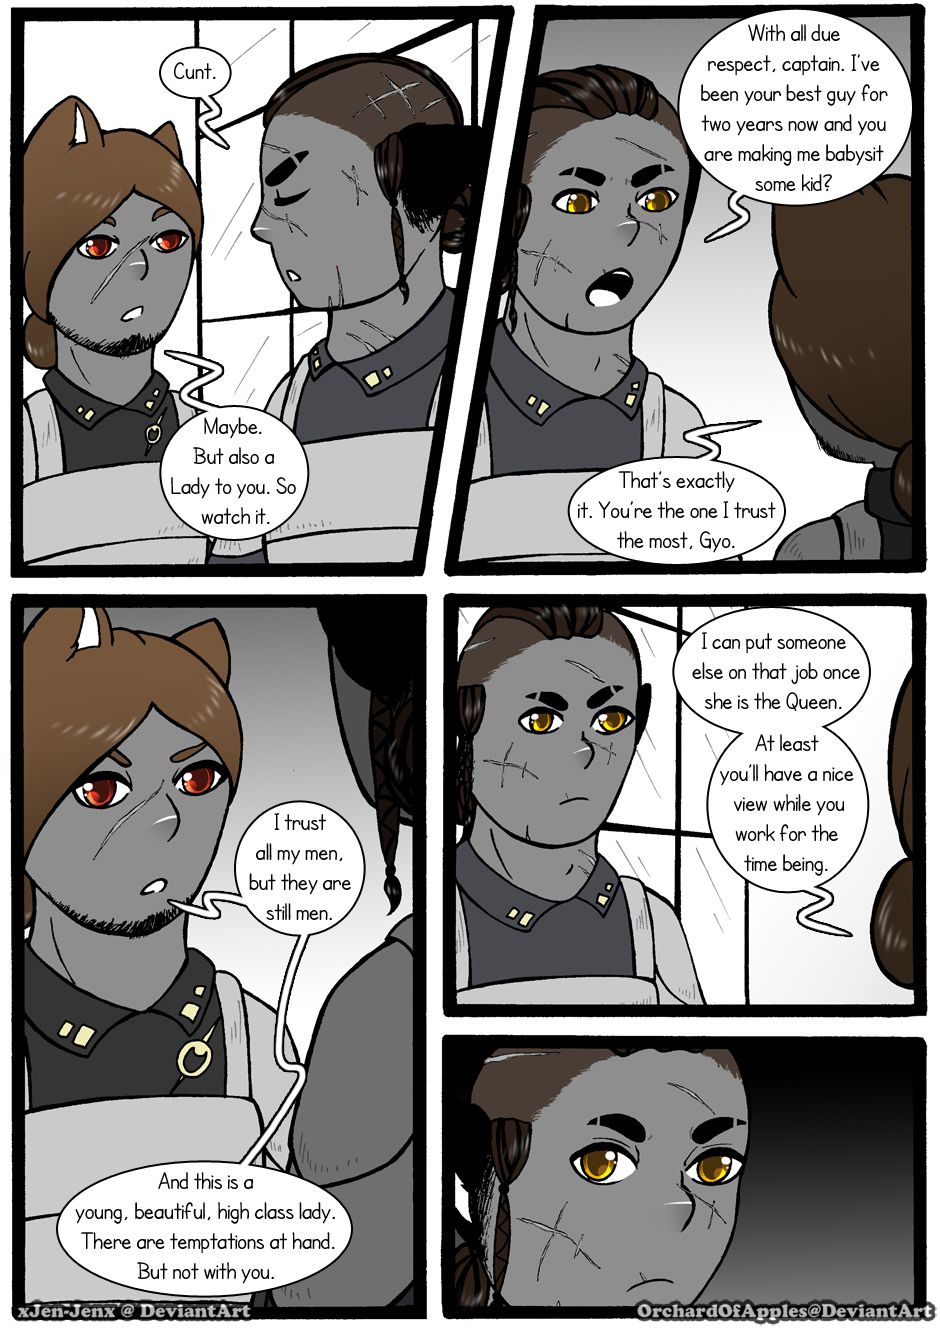 [Jeny-jen94] Between Kings and Queens [Ongoing] 369